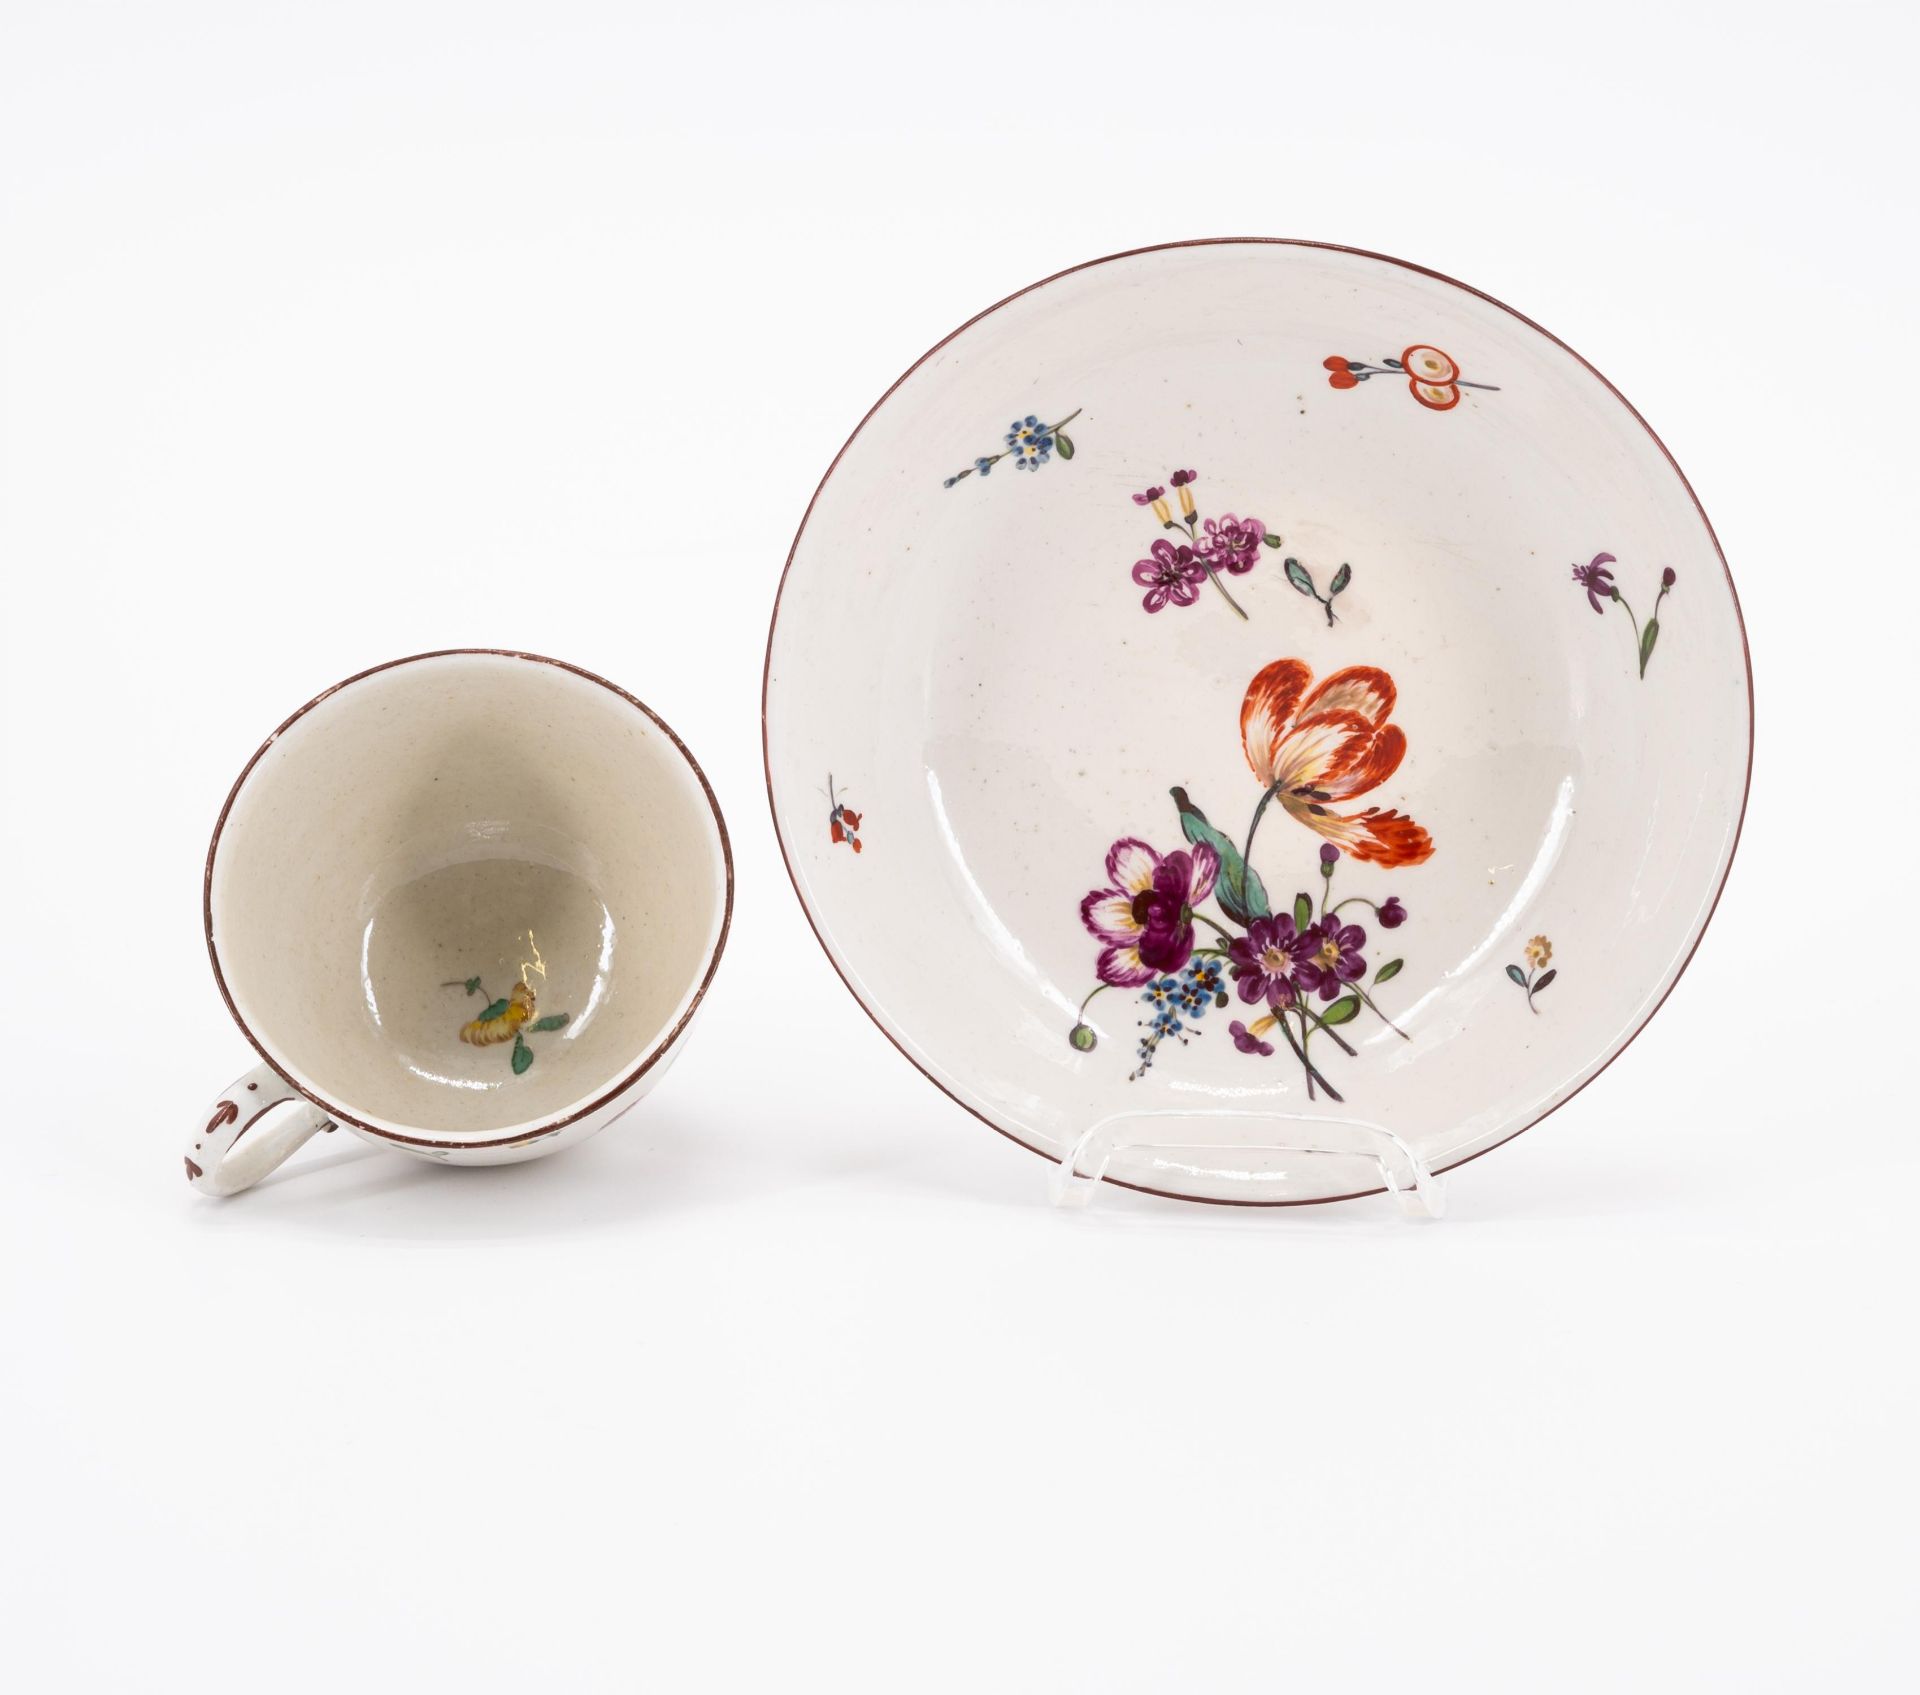 SIX PORCELAIN CUPS AND THREE SAUCERS WITH BIRD DECOR, FLOWERS AND LANDSCAPE SCENES - Image 15 of 16